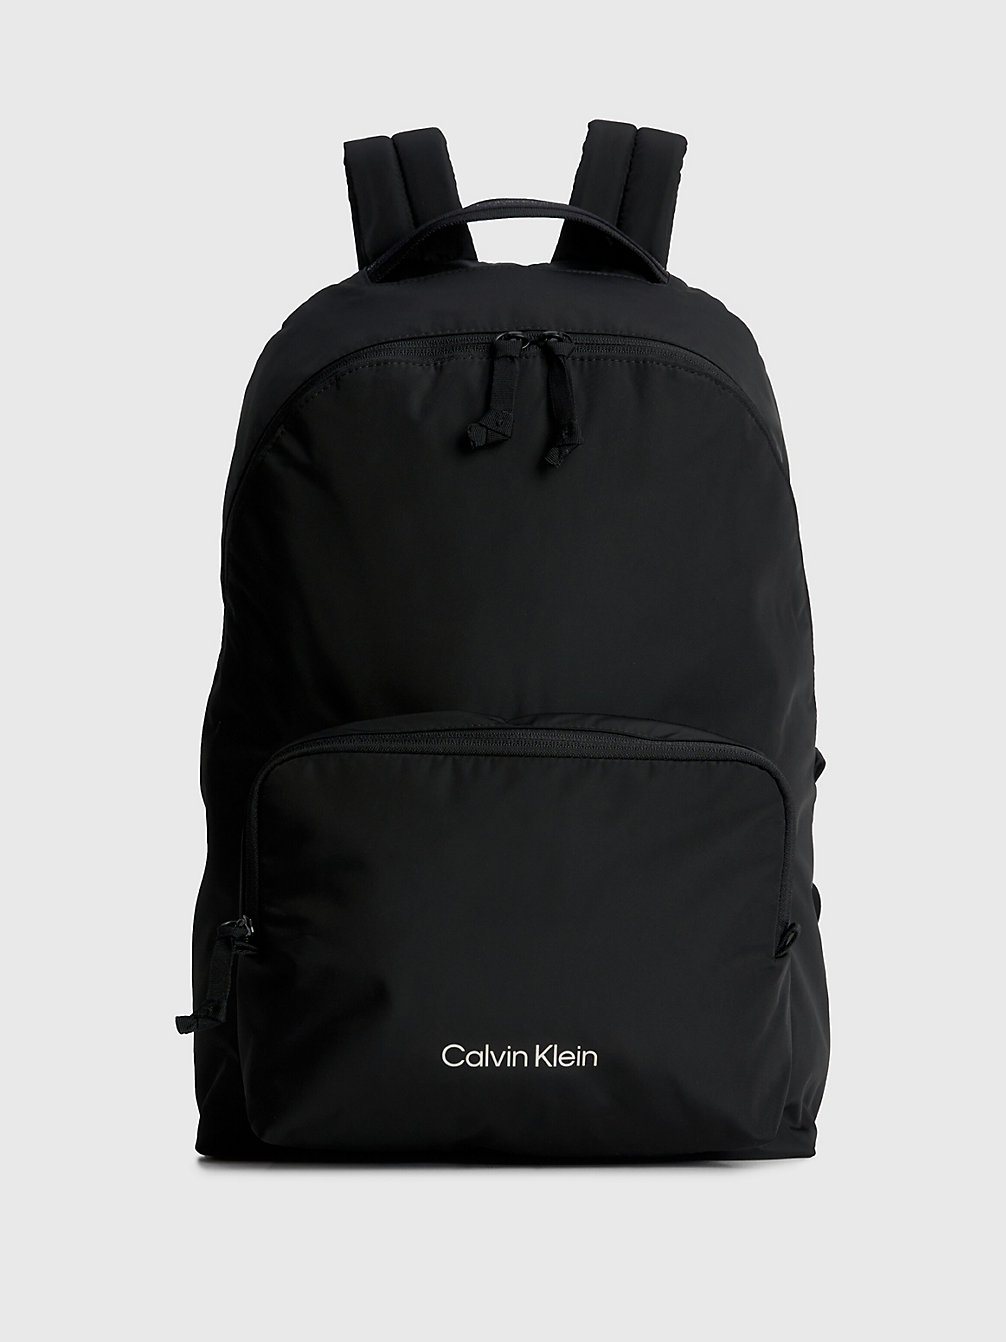 BLACK Recycled Backpack undefined unisex Calvin Klein